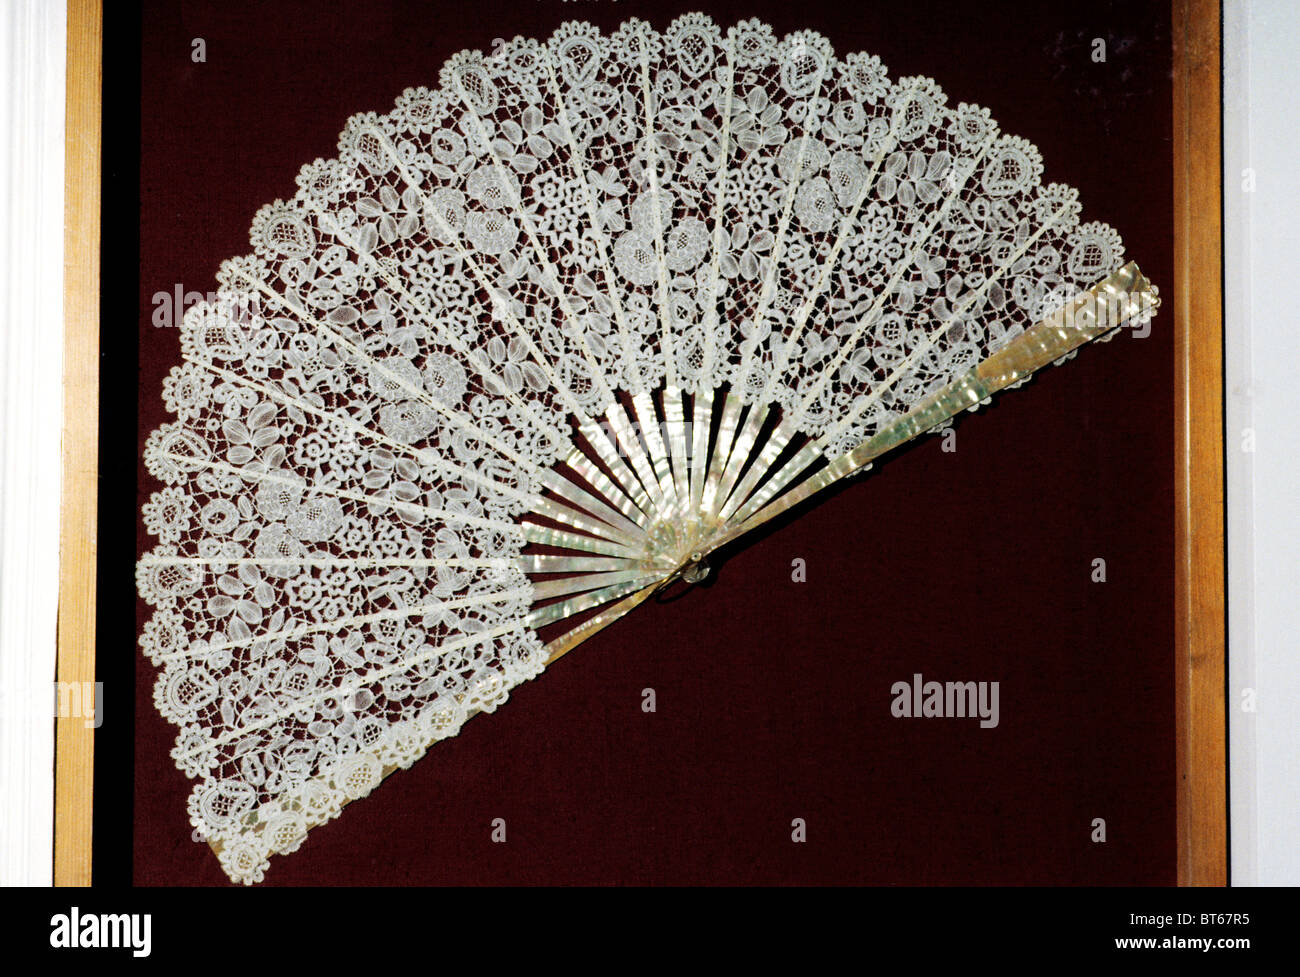 Exeter Museum of Costume and Lace, Honiton Lace Fan, mother of pearl and bone sticks 1890-1910 Devon England UK English fans Stock Photo